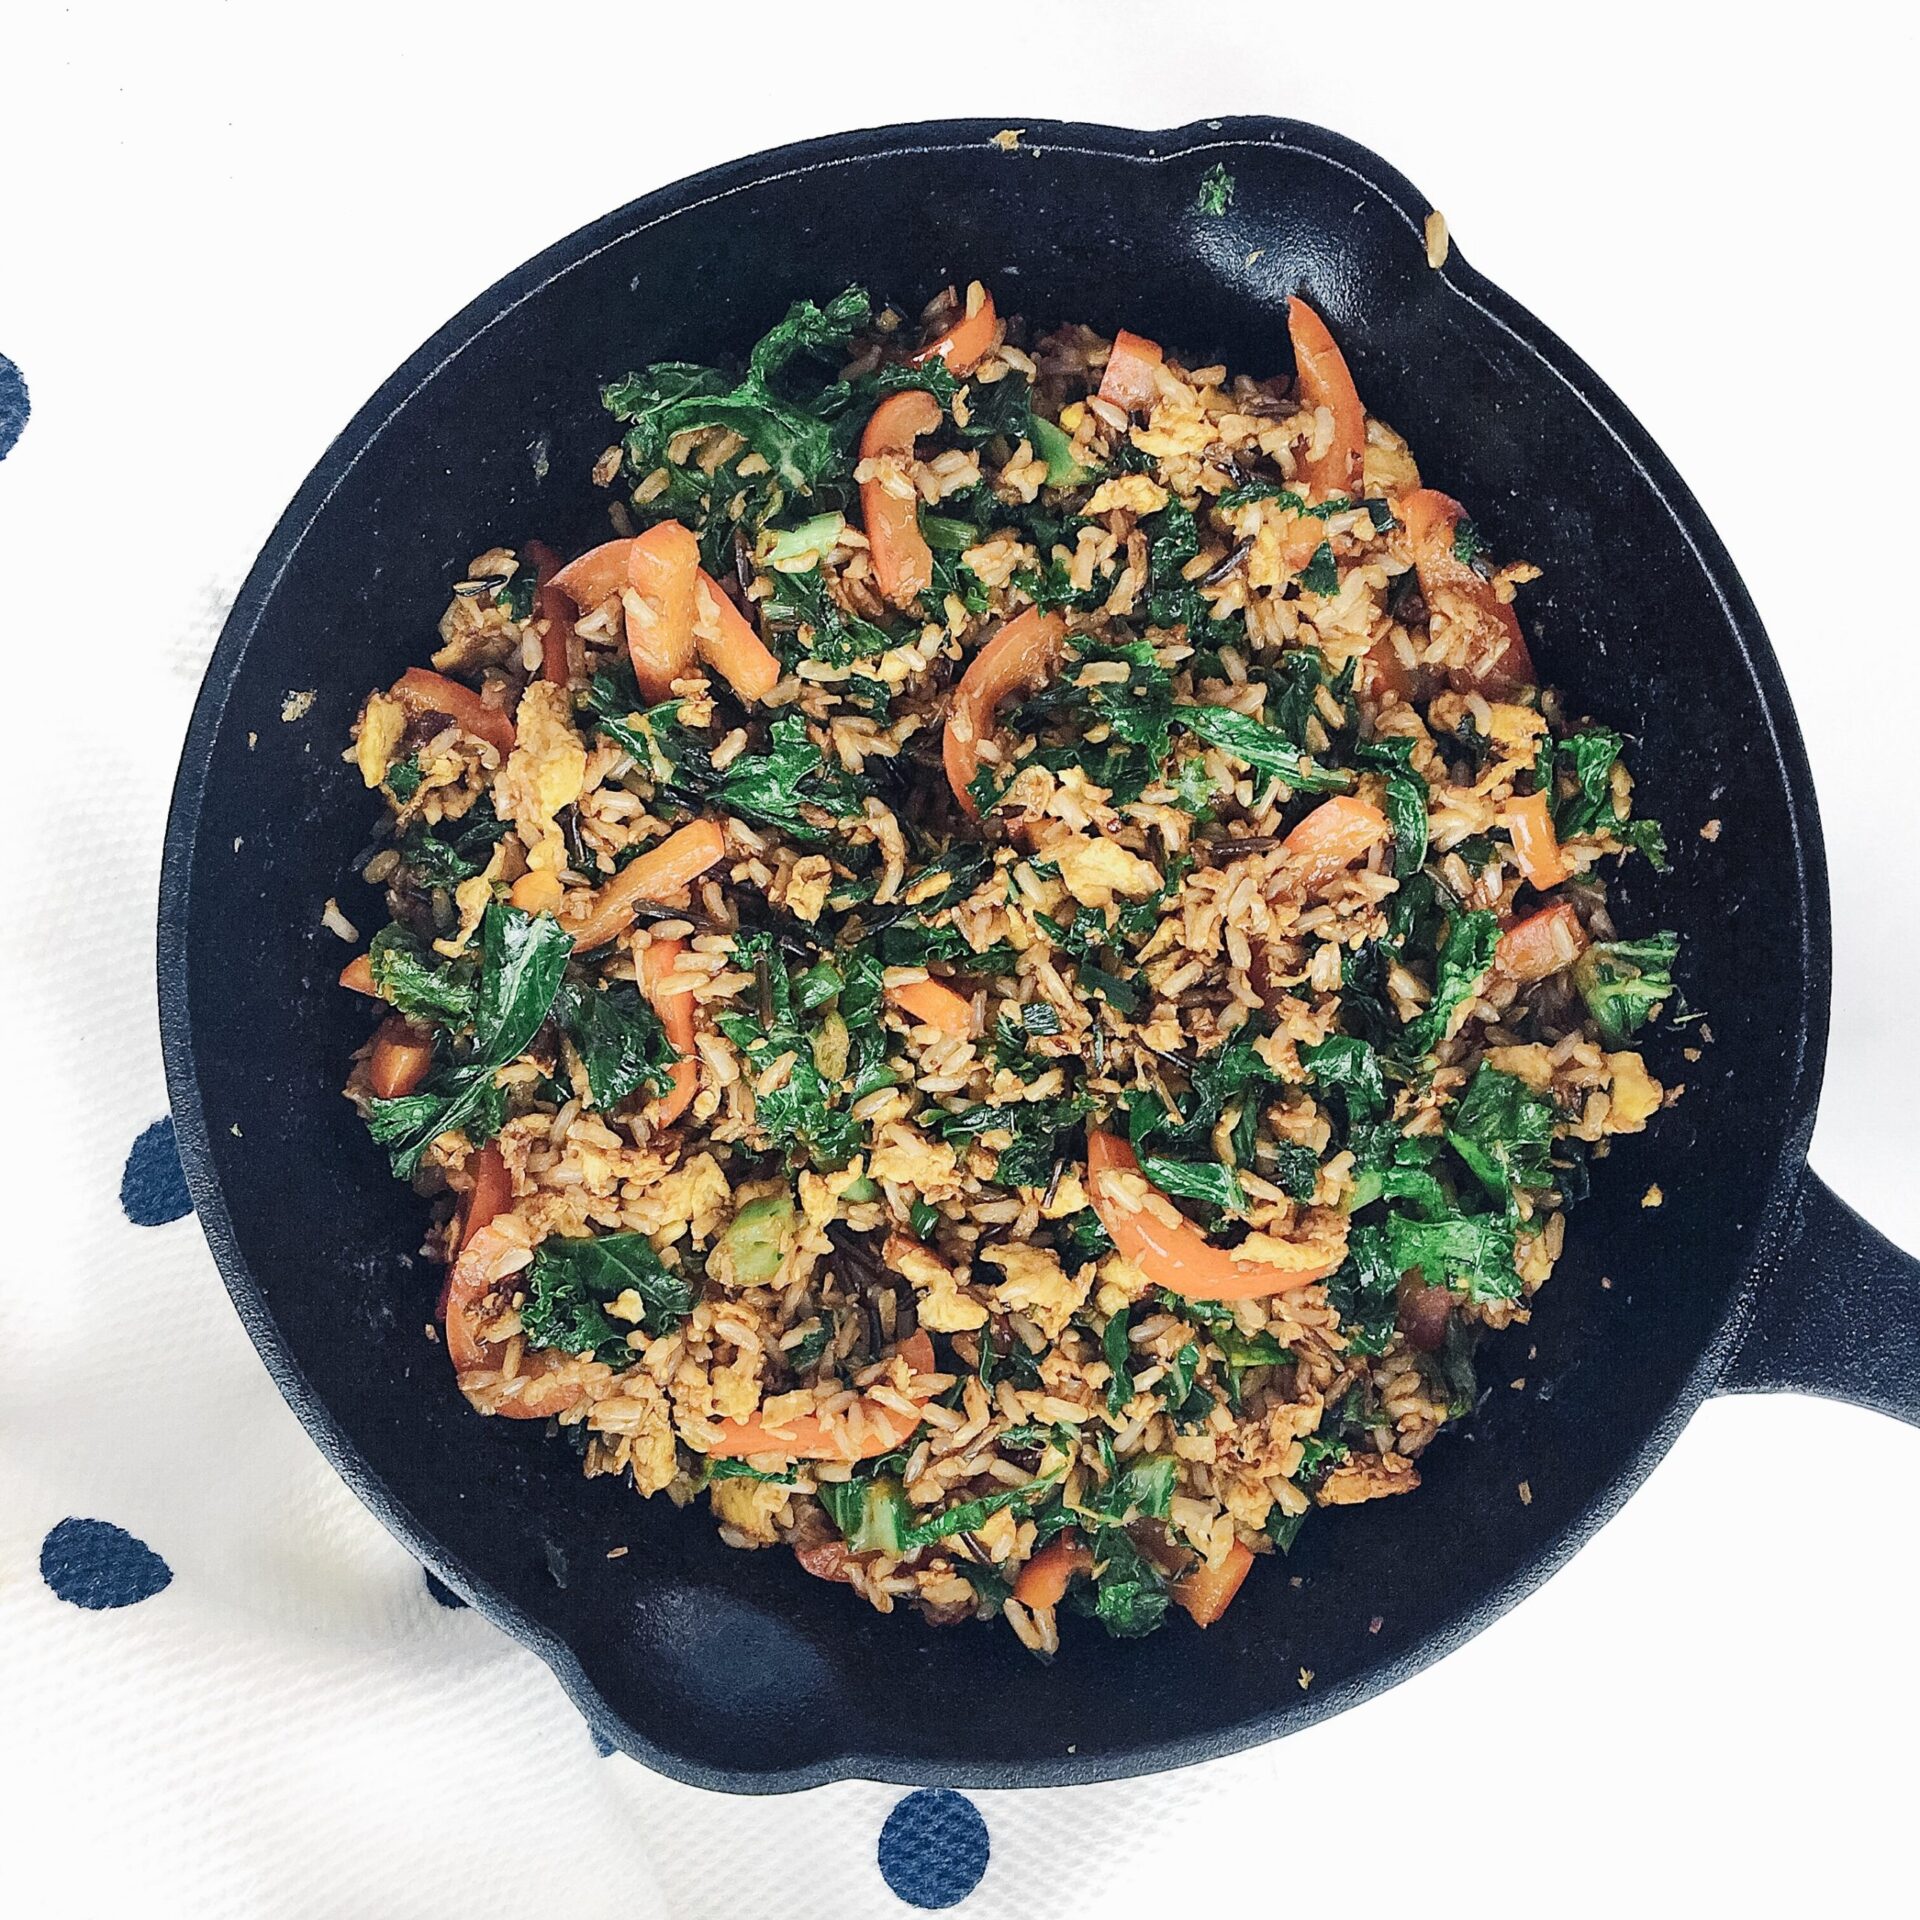 Spicy Kale and Coconut Stir Fry